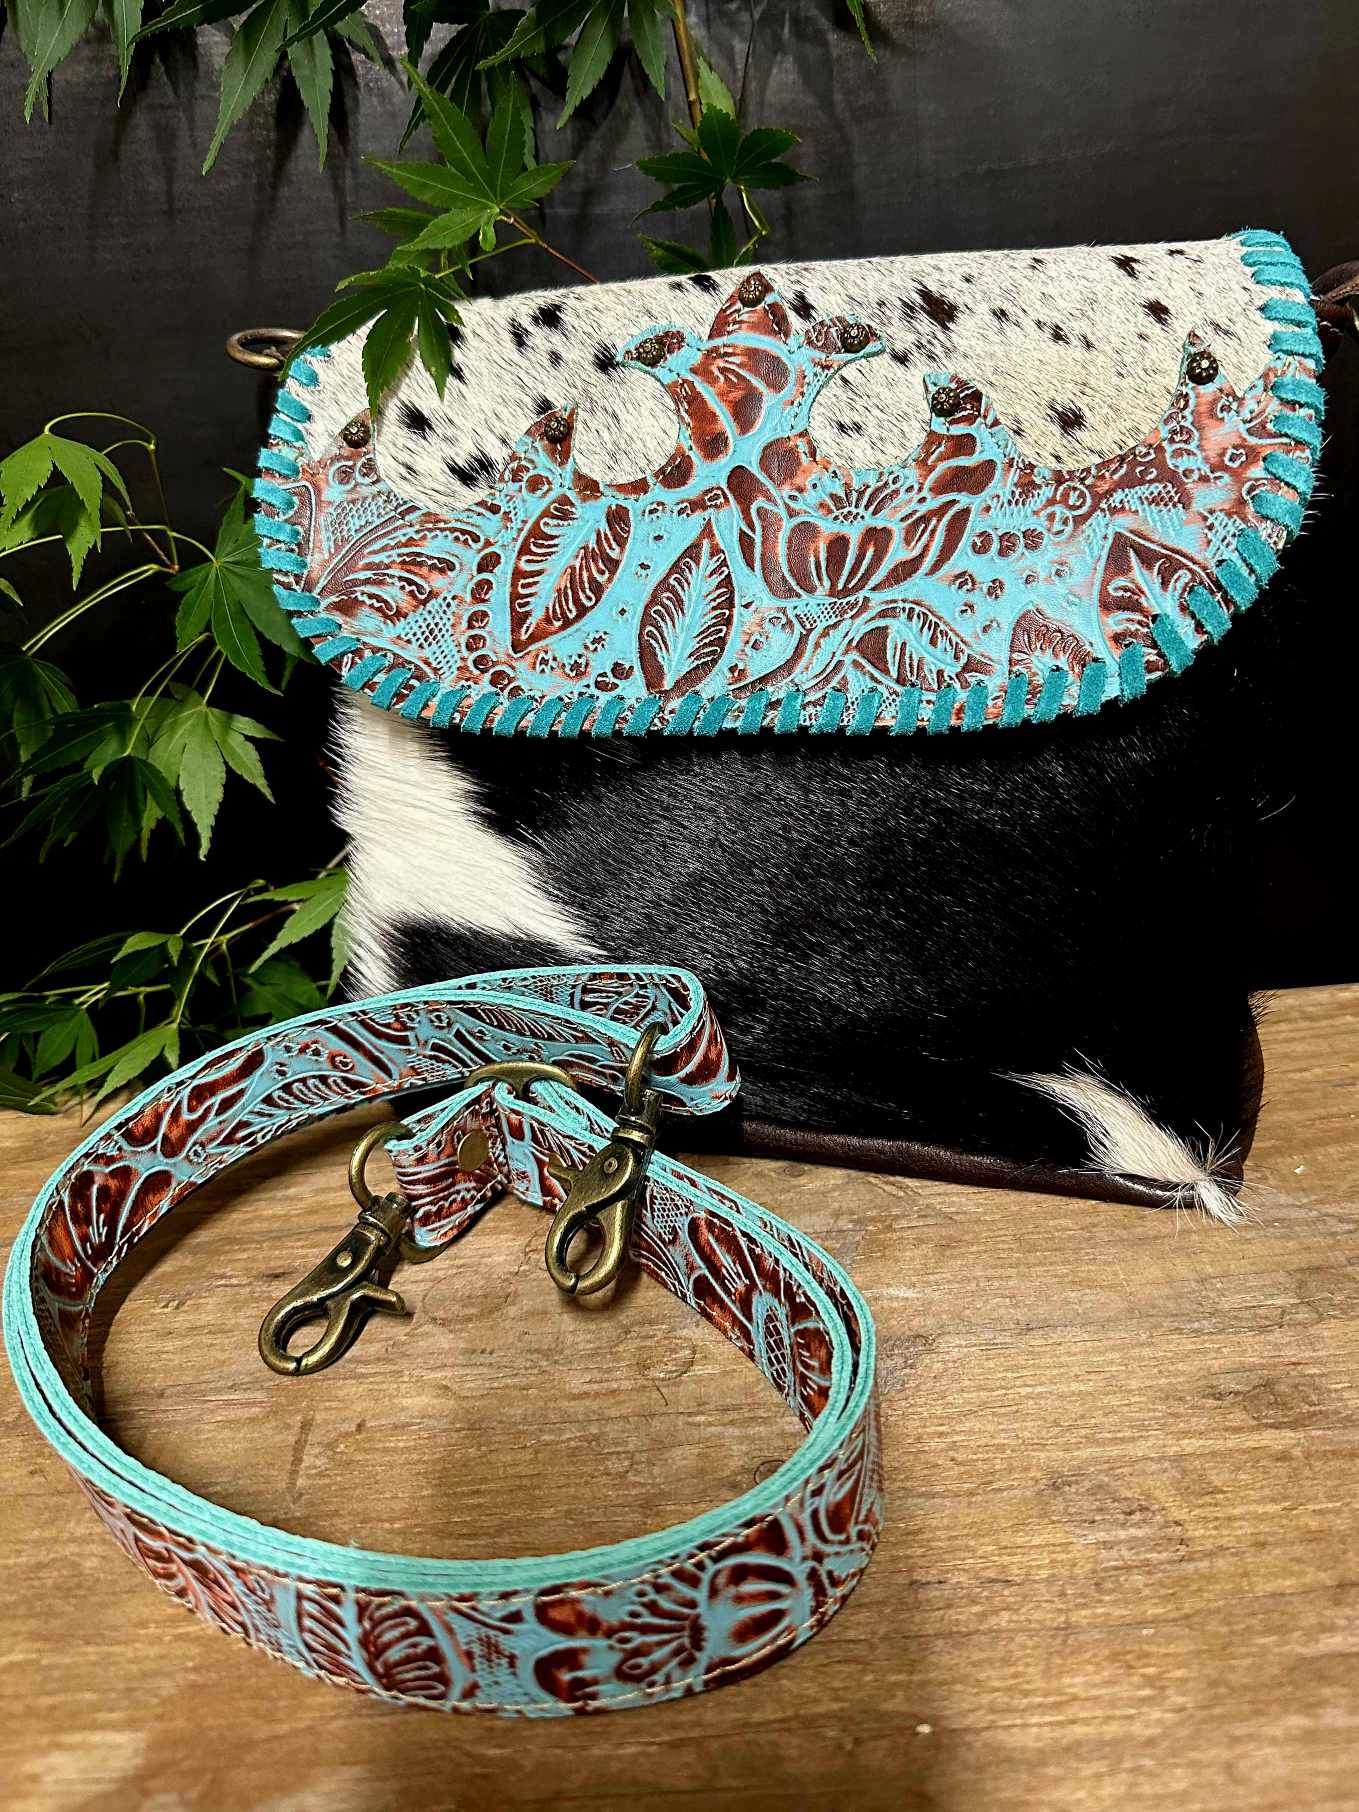 Western Hide & Leather Turquoise Embossed Crossbody